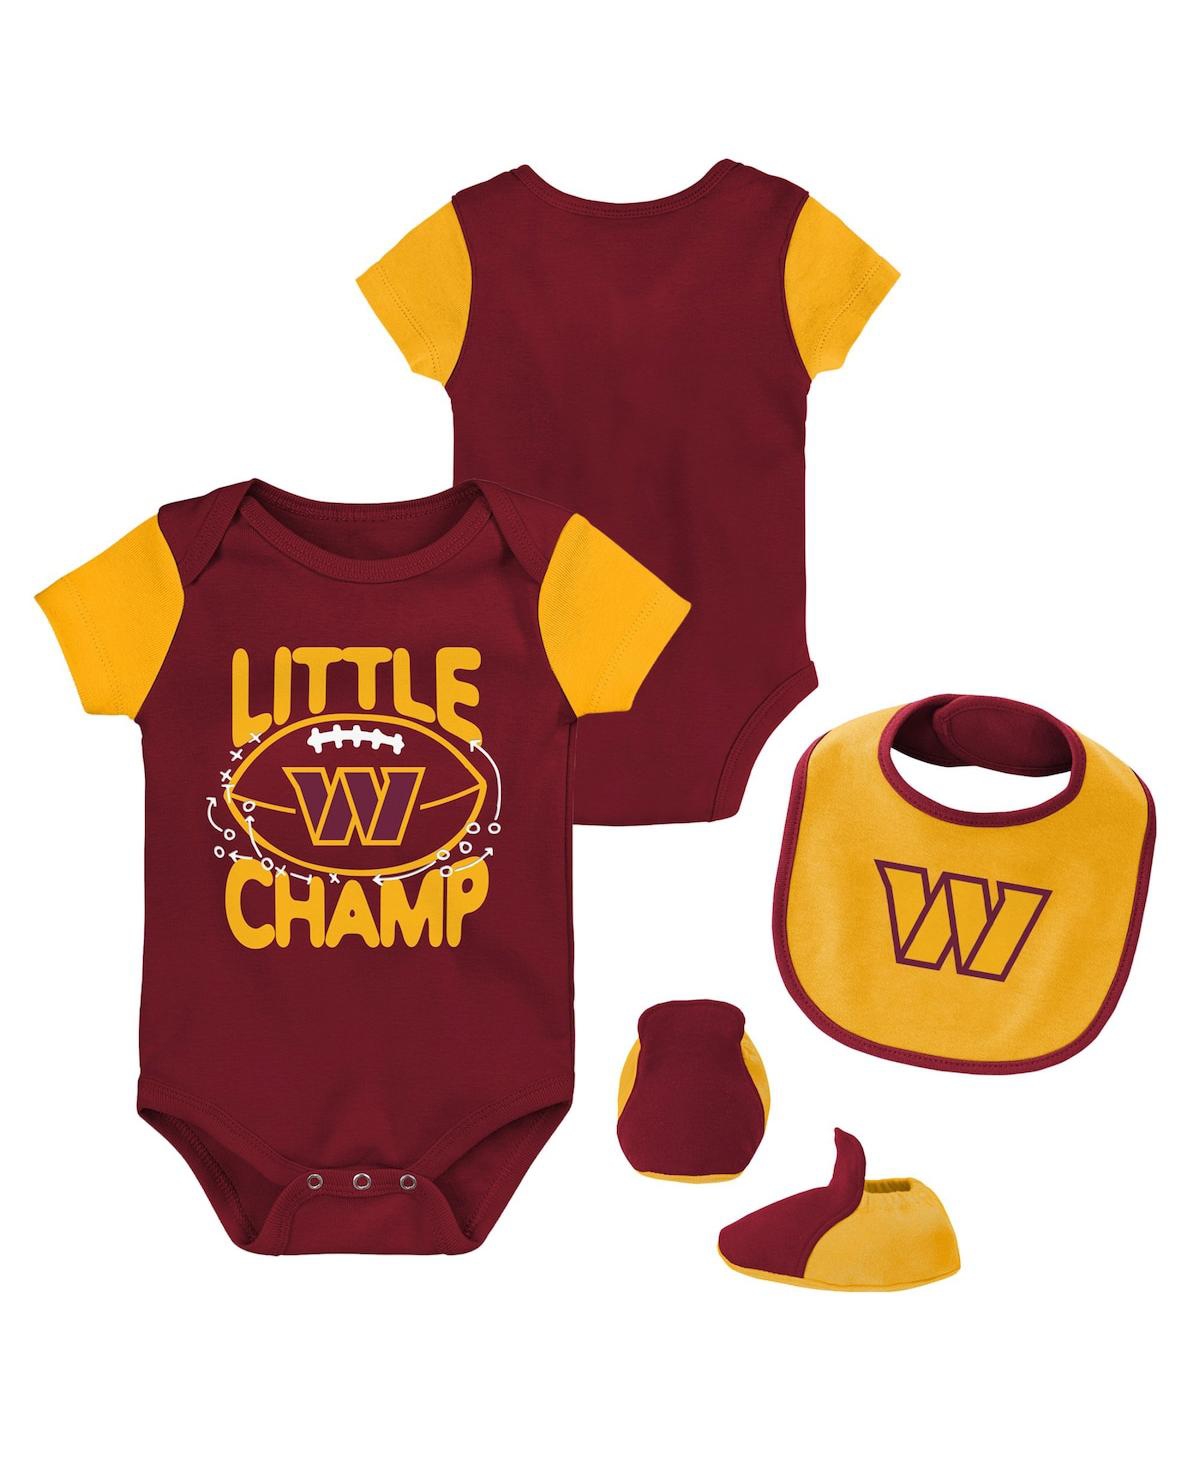 Outerstuff Babies' Newborn And Infant Boys And Girls Burgundy, Gold Washington Commanders Little Champ Three-piece Body In Burgundy,gold